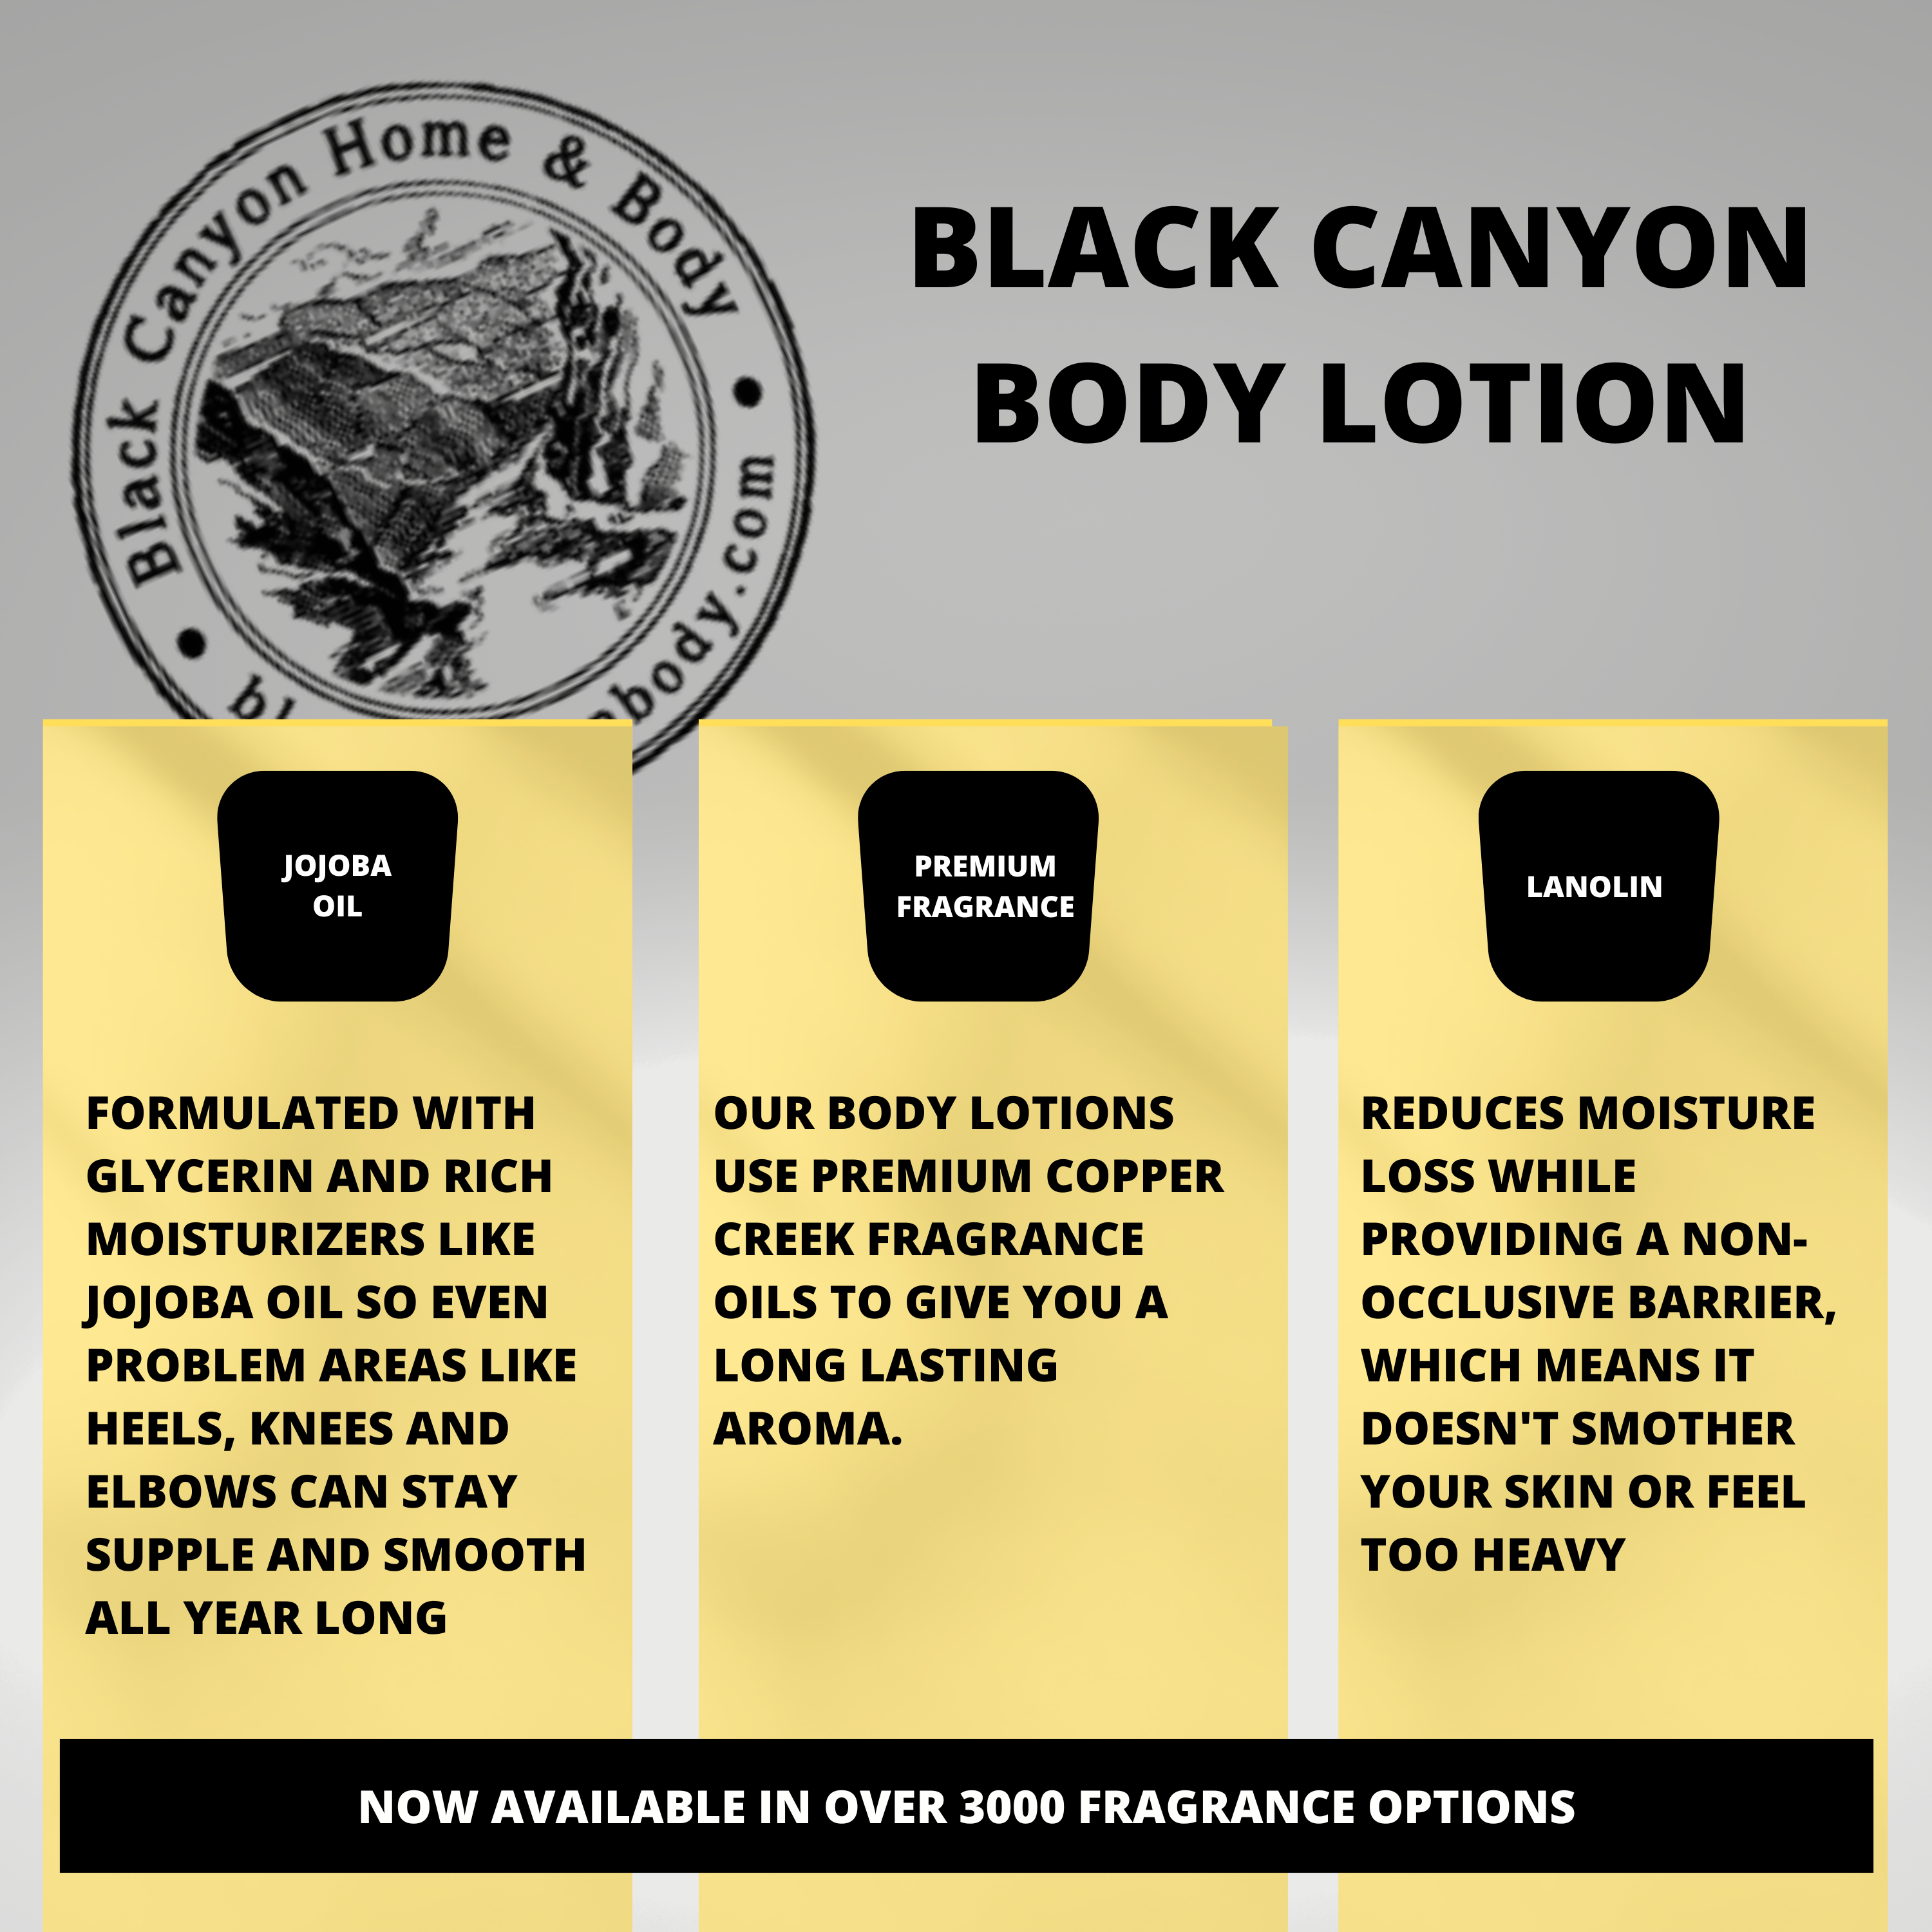 Black Canyon Amber Coconut Scented Luxury Body Lotion with Lanolin and Jojoba Oil